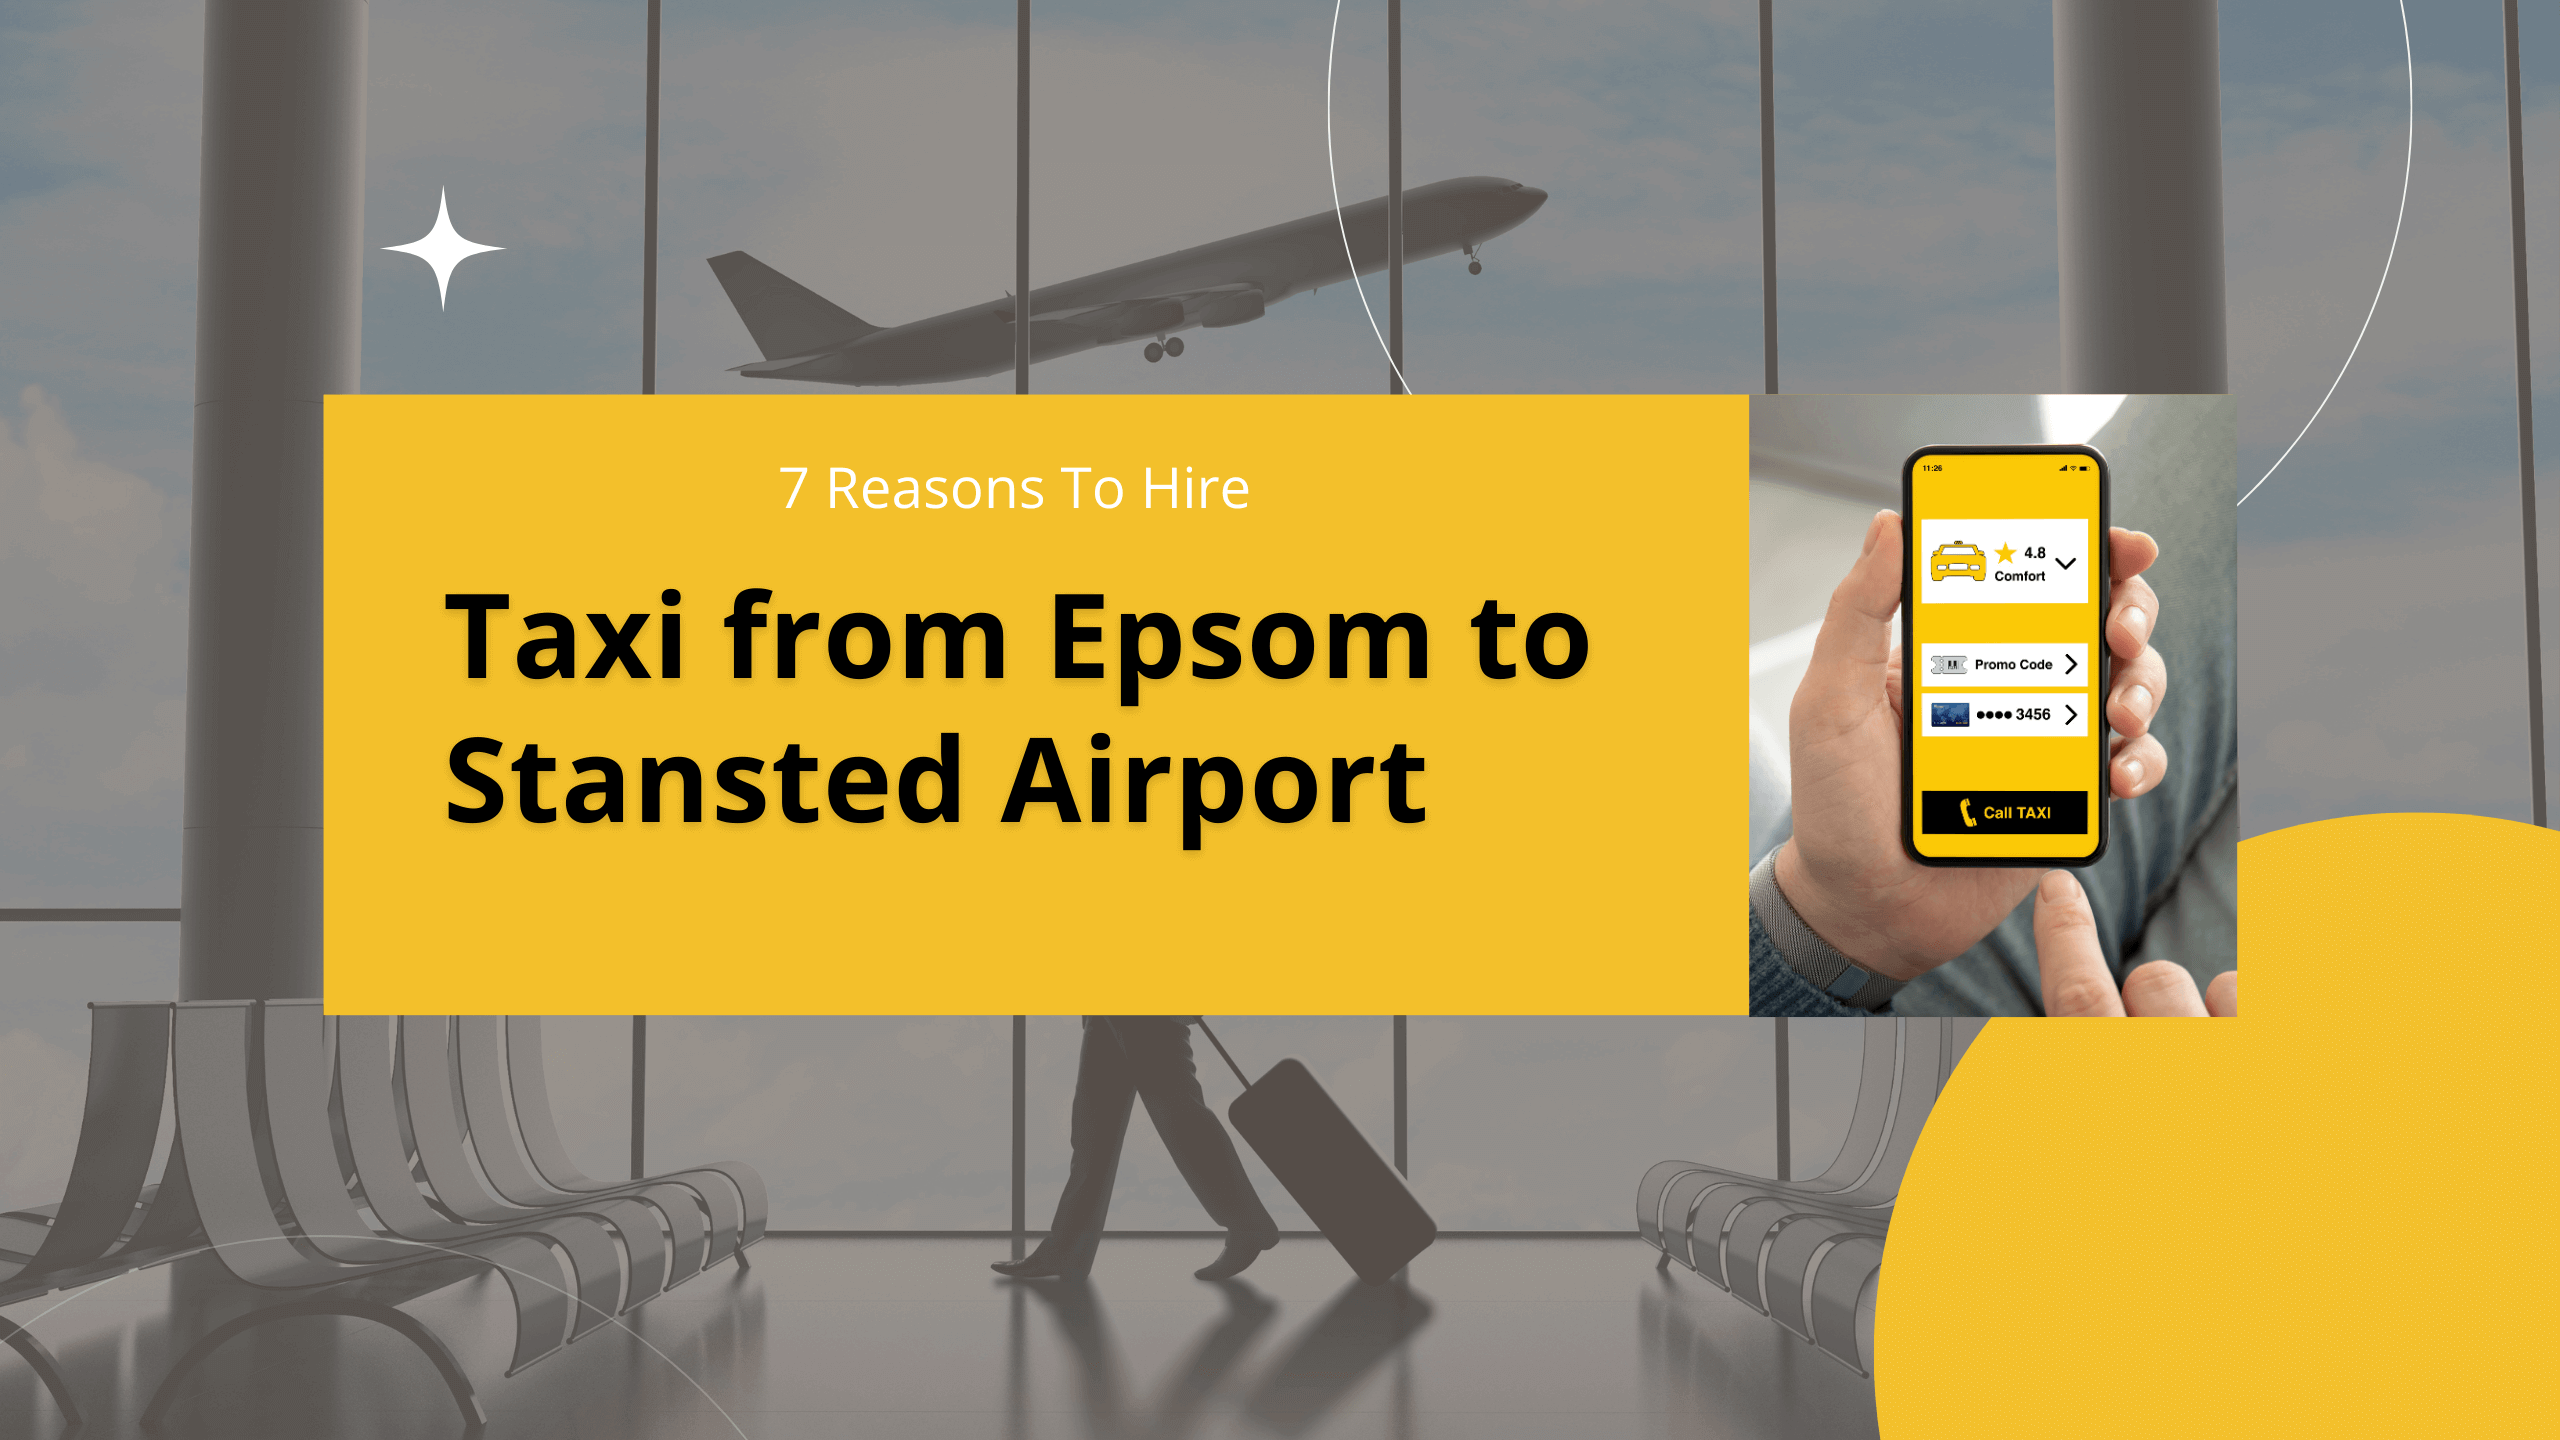 Reasons To Hire Taxi from Epsom to Stansted Airport